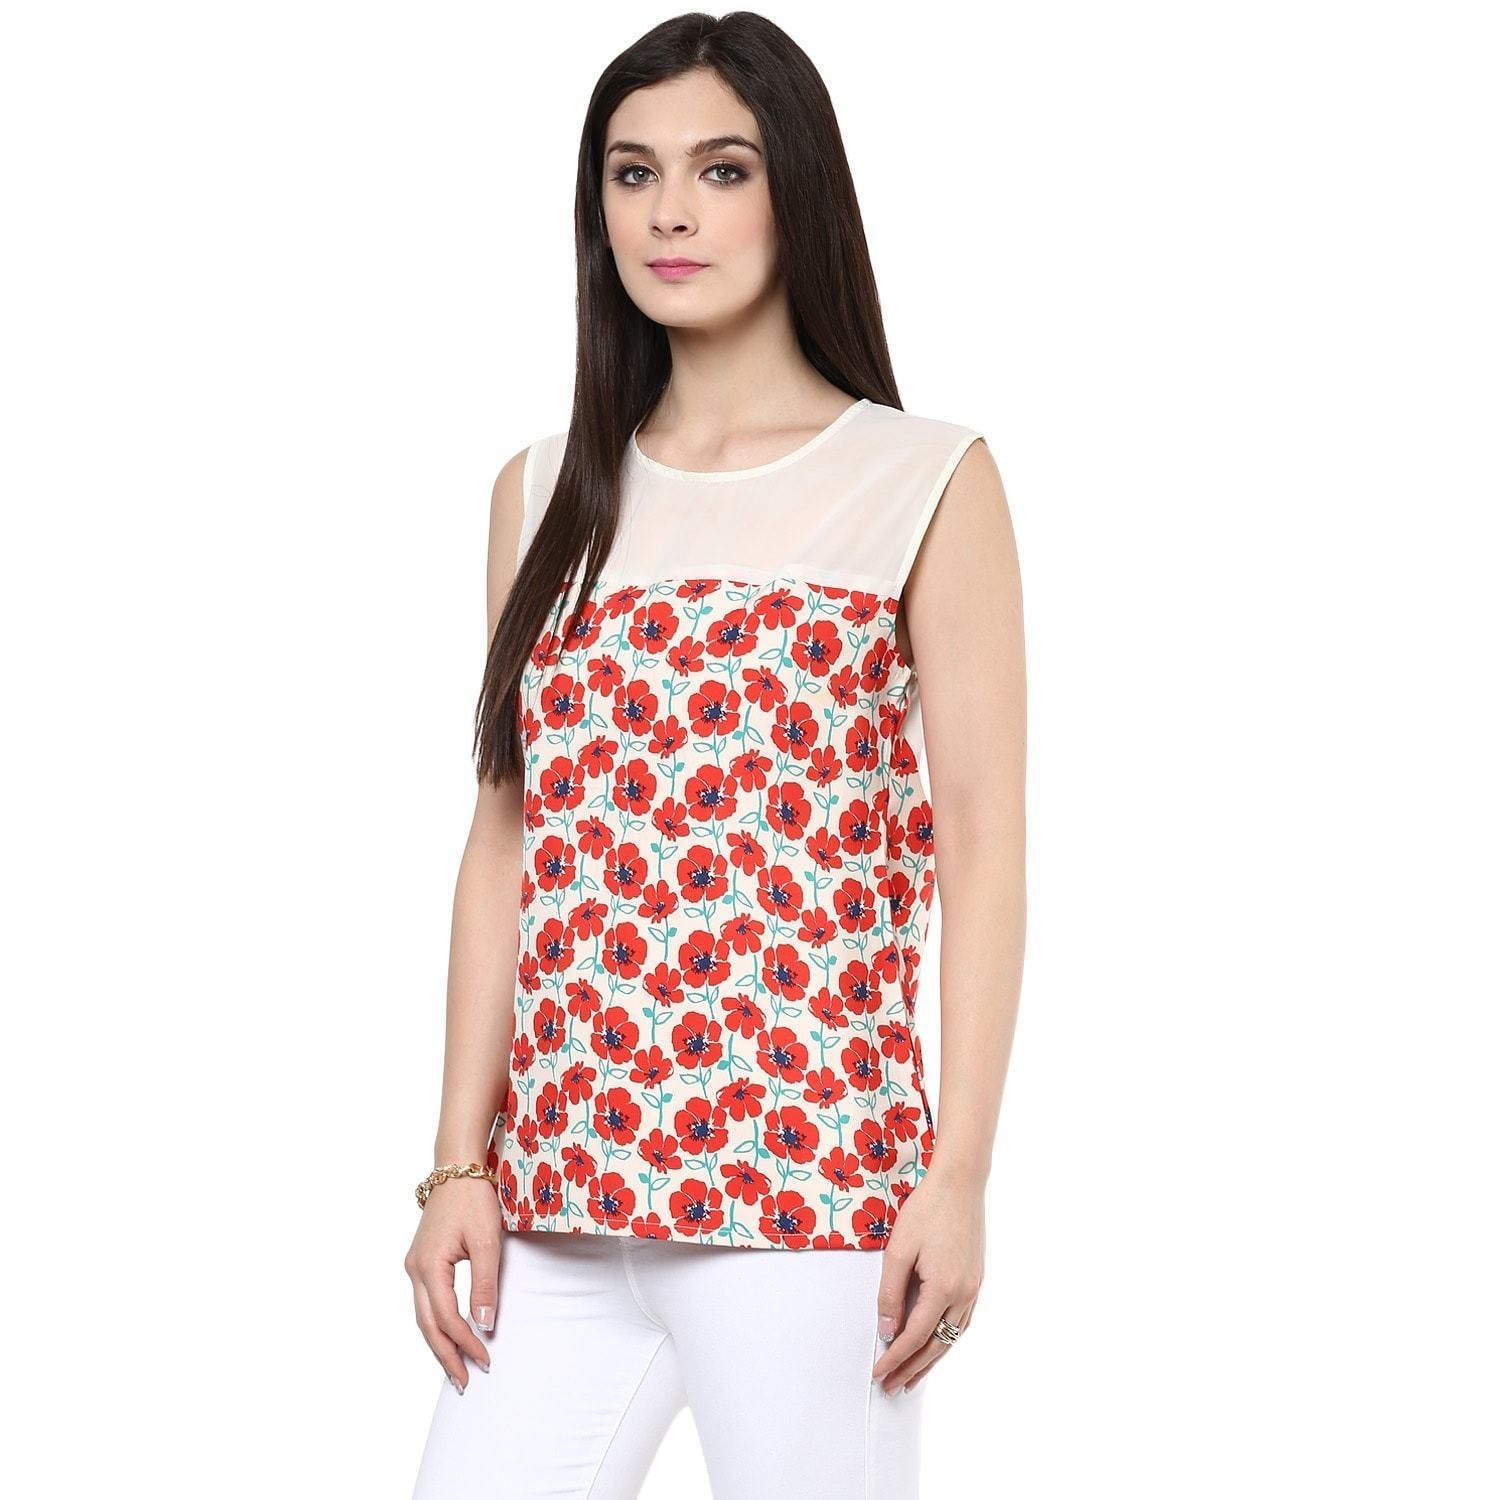 Women's Red Floral Top - Pannkh